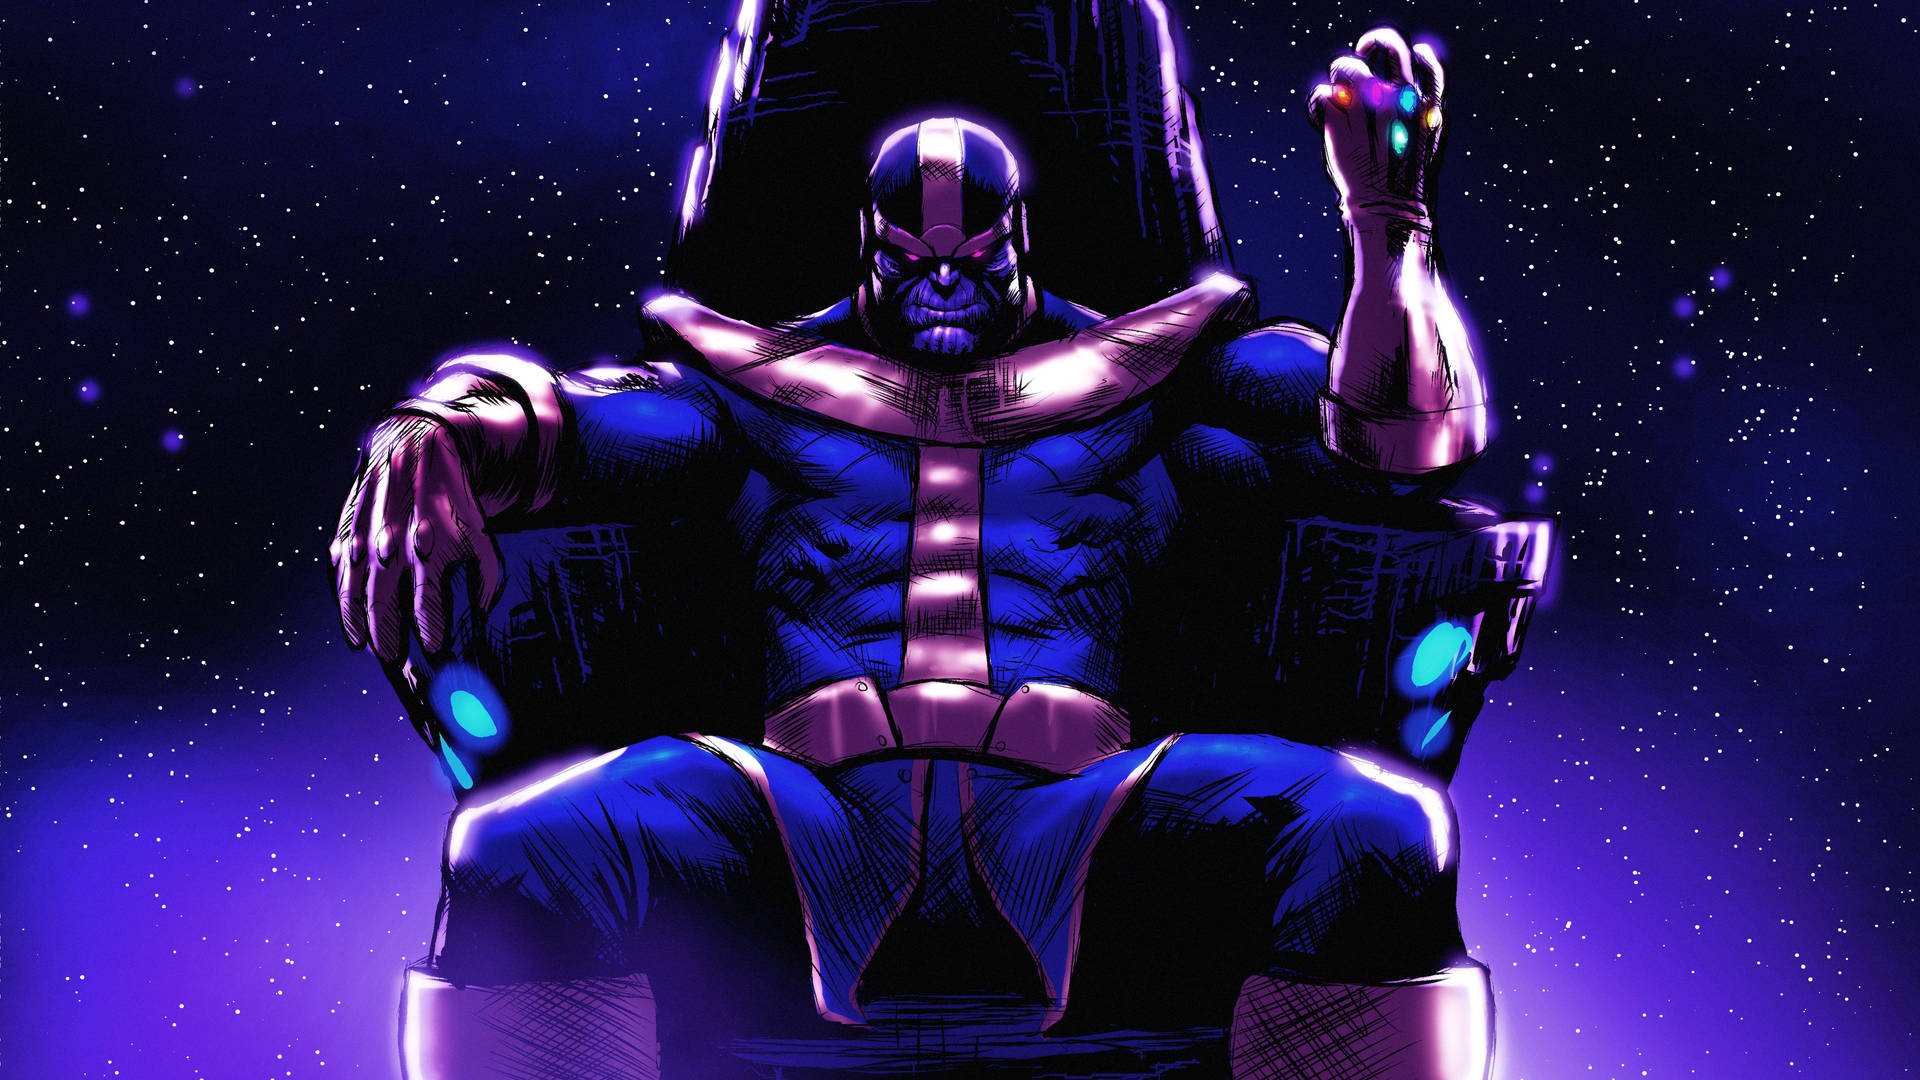 Free Thanos Hd Wallpaper Downloads, [100+] Thanos Hd Wallpapers for FREE |  